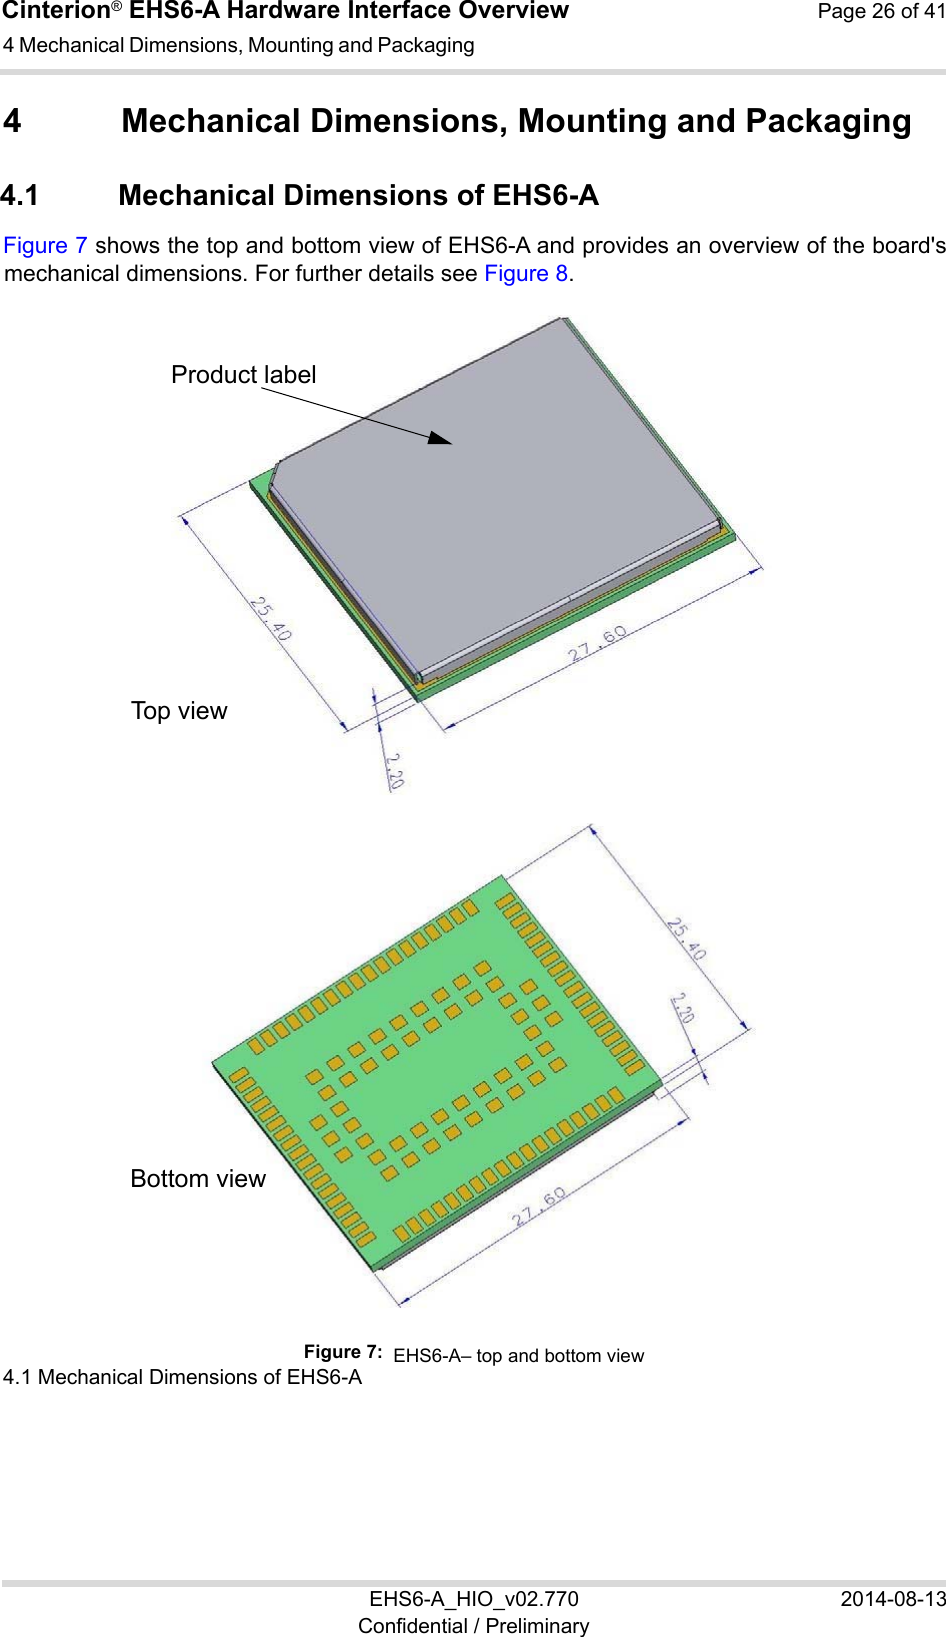 Cinterion® EHS6-A Hardware Interface Overview  Page 26 of 41 EHS6-A_HIO_v02.770  2014-08-13 Confidential / Preliminary 4 Mechanical Dimensions, Mounting and Packaging 26 4  Mechanical Dimensions, Mounting and Packaging 4.1  Mechanical Dimensions of EHS6-A Figure 7 shows the top and bottom view of EHS6-A and provides an overview of the board&apos;s mechanical dimensions. For further details see Figure 8.   4.1 Mechanical Dimensions of EHS6-A 26 Figure 7:  EHS6-A– top and bottom viewProduct label Top view Bottom view 